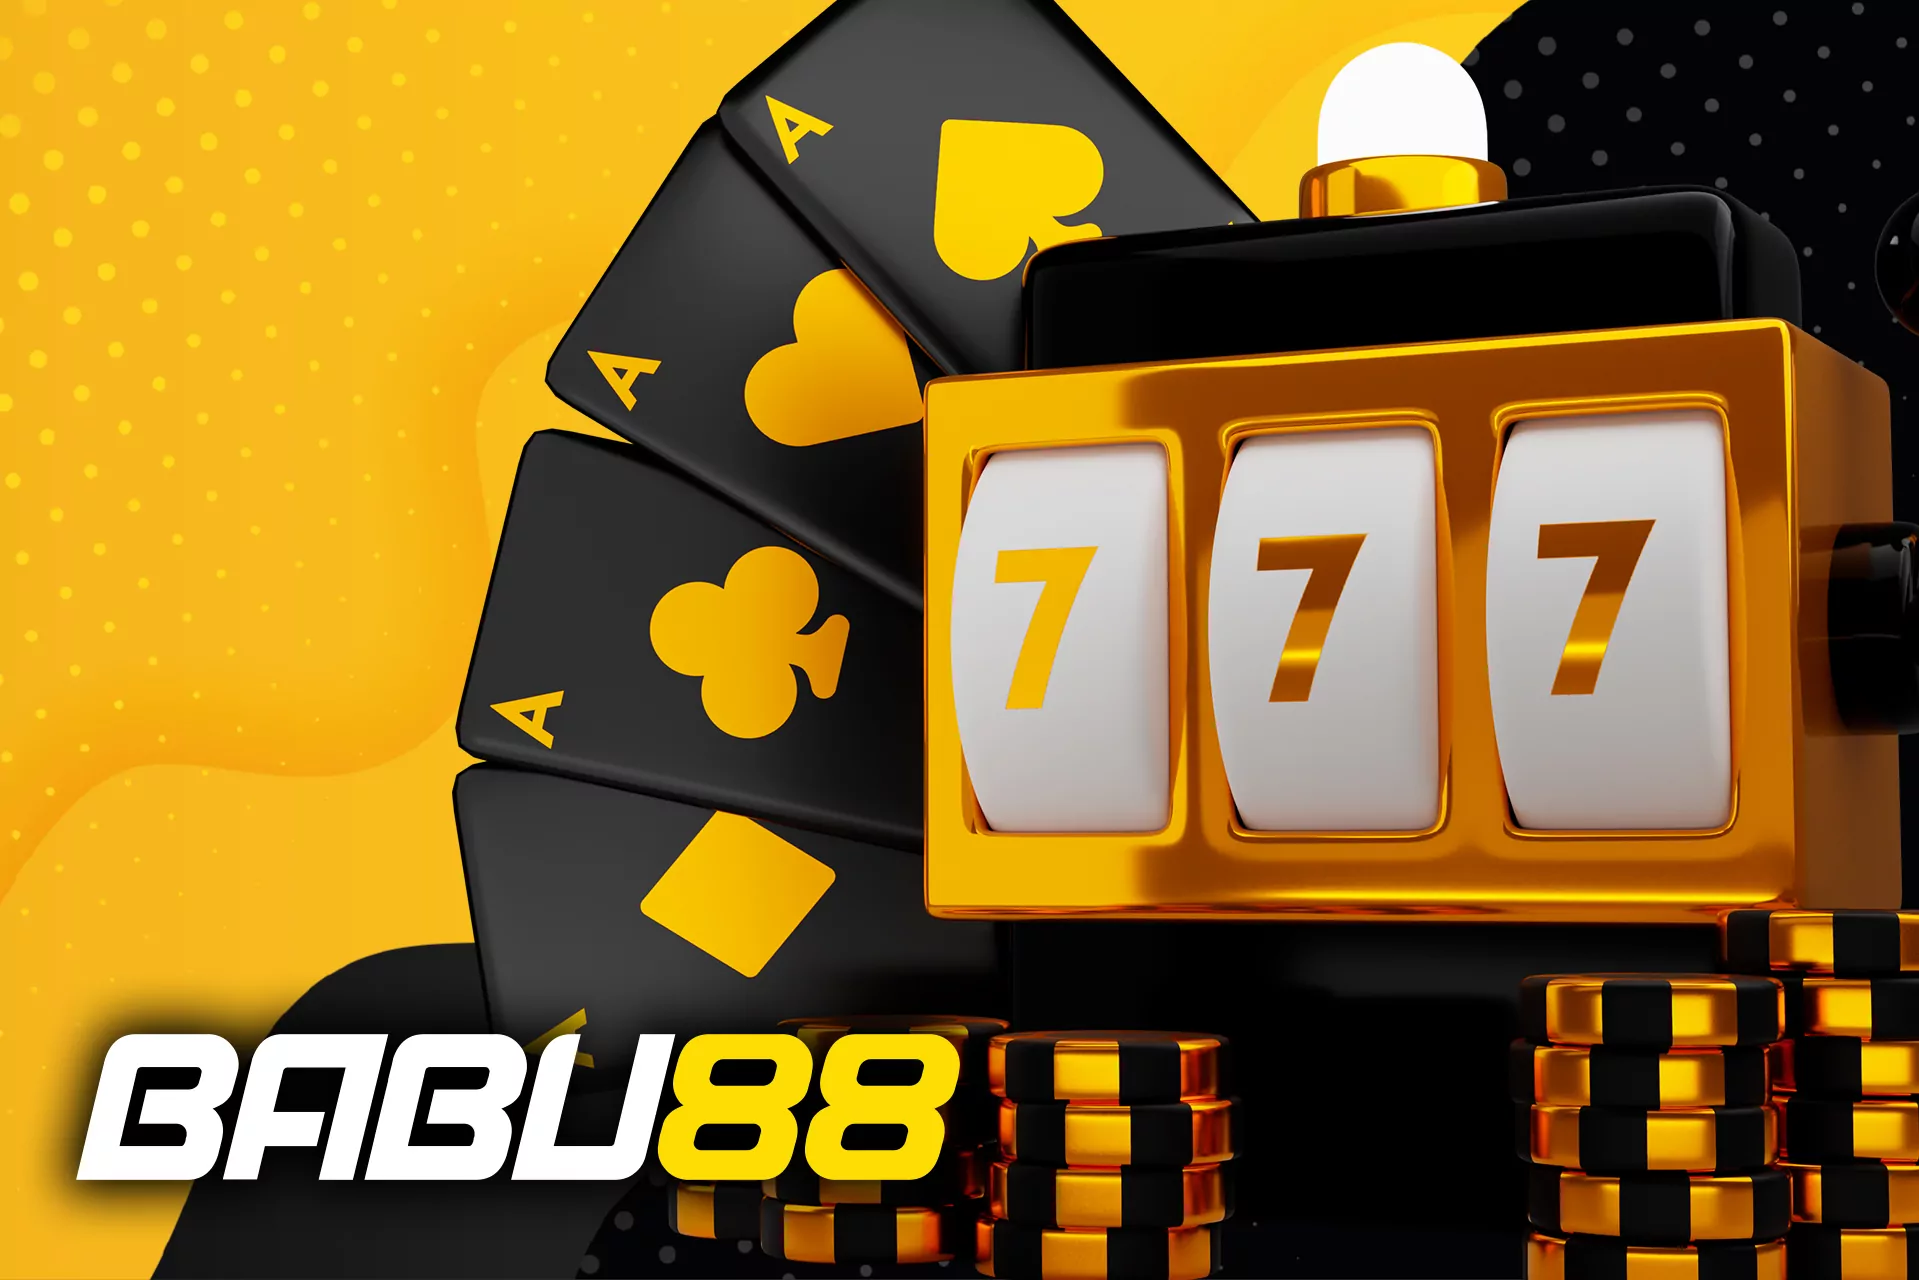 Play casino slots on the Babu88 website and app.